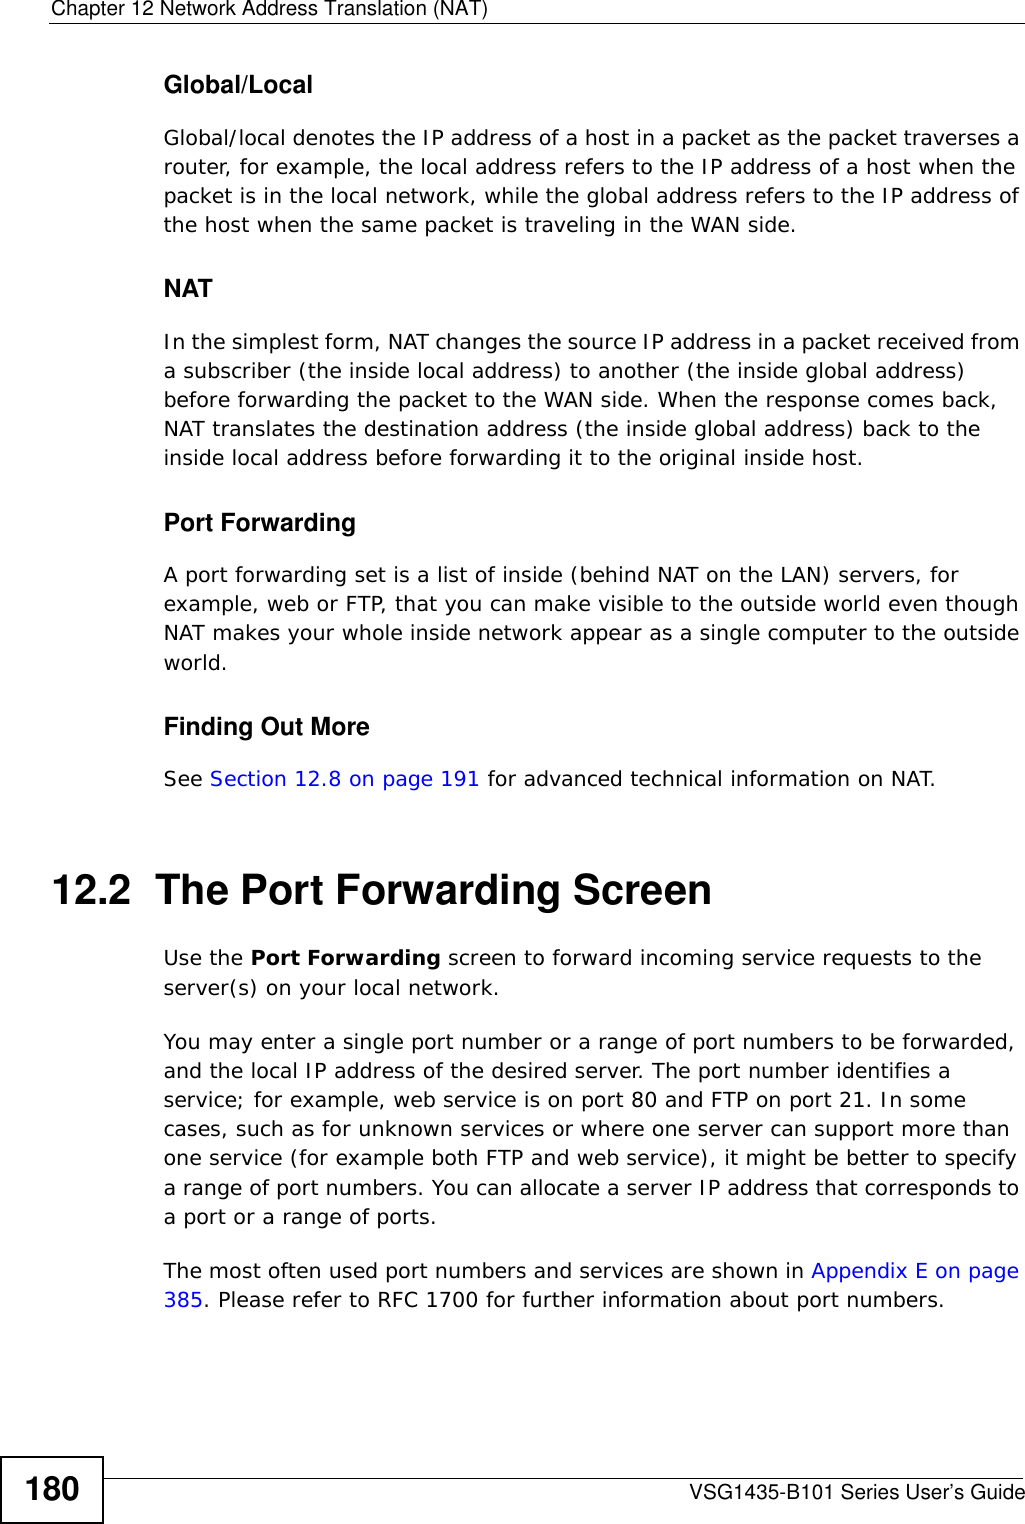 Chapter 12 Network Address Translation (NAT)VSG1435-B101 Series User’s Guide180Global/LocalGlobal/local denotes the IP address of a host in a packet as the packet traverses a router, for example, the local address refers to the IP address of a host when the packet is in the local network, while the global address refers to the IP address of the host when the same packet is traveling in the WAN side. NATIn the simplest form, NAT changes the source IP address in a packet received from a subscriber (the inside local address) to another (the inside global address) before forwarding the packet to the WAN side. When the response comes back, NAT translates the destination address (the inside global address) back to the inside local address before forwarding it to the original inside host.Port ForwardingA port forwarding set is a list of inside (behind NAT on the LAN) servers, for example, web or FTP, that you can make visible to the outside world even though NAT makes your whole inside network appear as a single computer to the outside world.Finding Out MoreSee Section 12.8 on page 191 for advanced technical information on NAT.12.2  The Port Forwarding Screen Use the Port Forwarding screen to forward incoming service requests to the server(s) on your local network.You may enter a single port number or a range of port numbers to be forwarded, and the local IP address of the desired server. The port number identifies a service; for example, web service is on port 80 and FTP on port 21. In some cases, such as for unknown services or where one server can support more than one service (for example both FTP and web service), it might be better to specify a range of port numbers. You can allocate a server IP address that corresponds to a port or a range of ports.The most often used port numbers and services are shown in Appendix E on page 385. Please refer to RFC 1700 for further information about port numbers. 